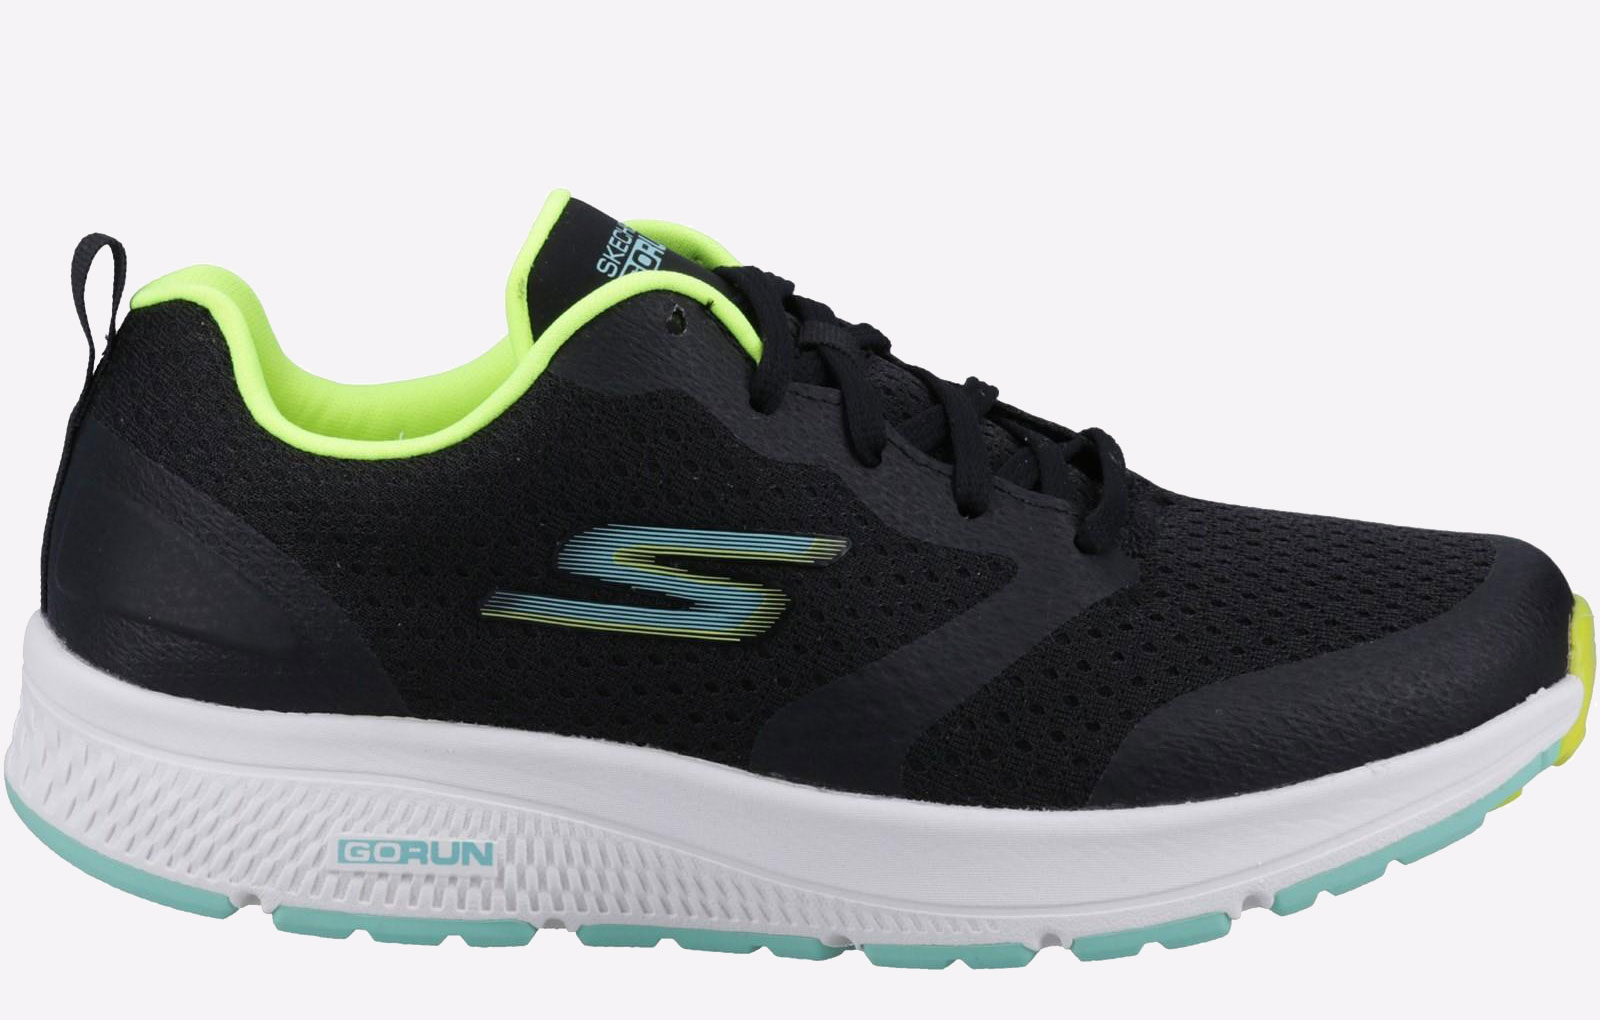 Skechers GO RUN Consistent - Intensify-X Trainers Womens - GRD-35884-66995-08